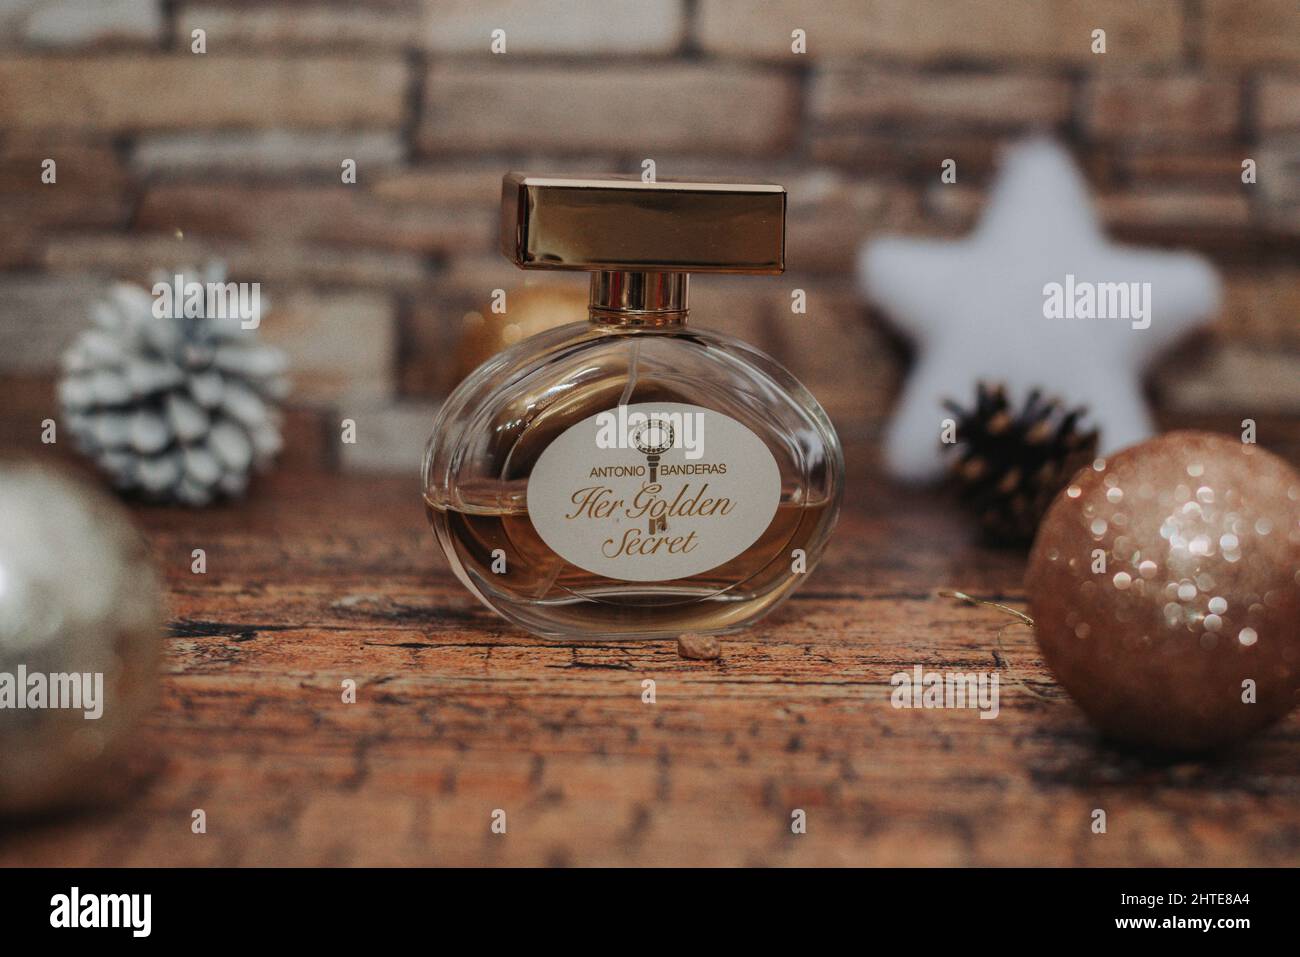 Perfume flacon with winter holiday decorations on the background Stock Photo